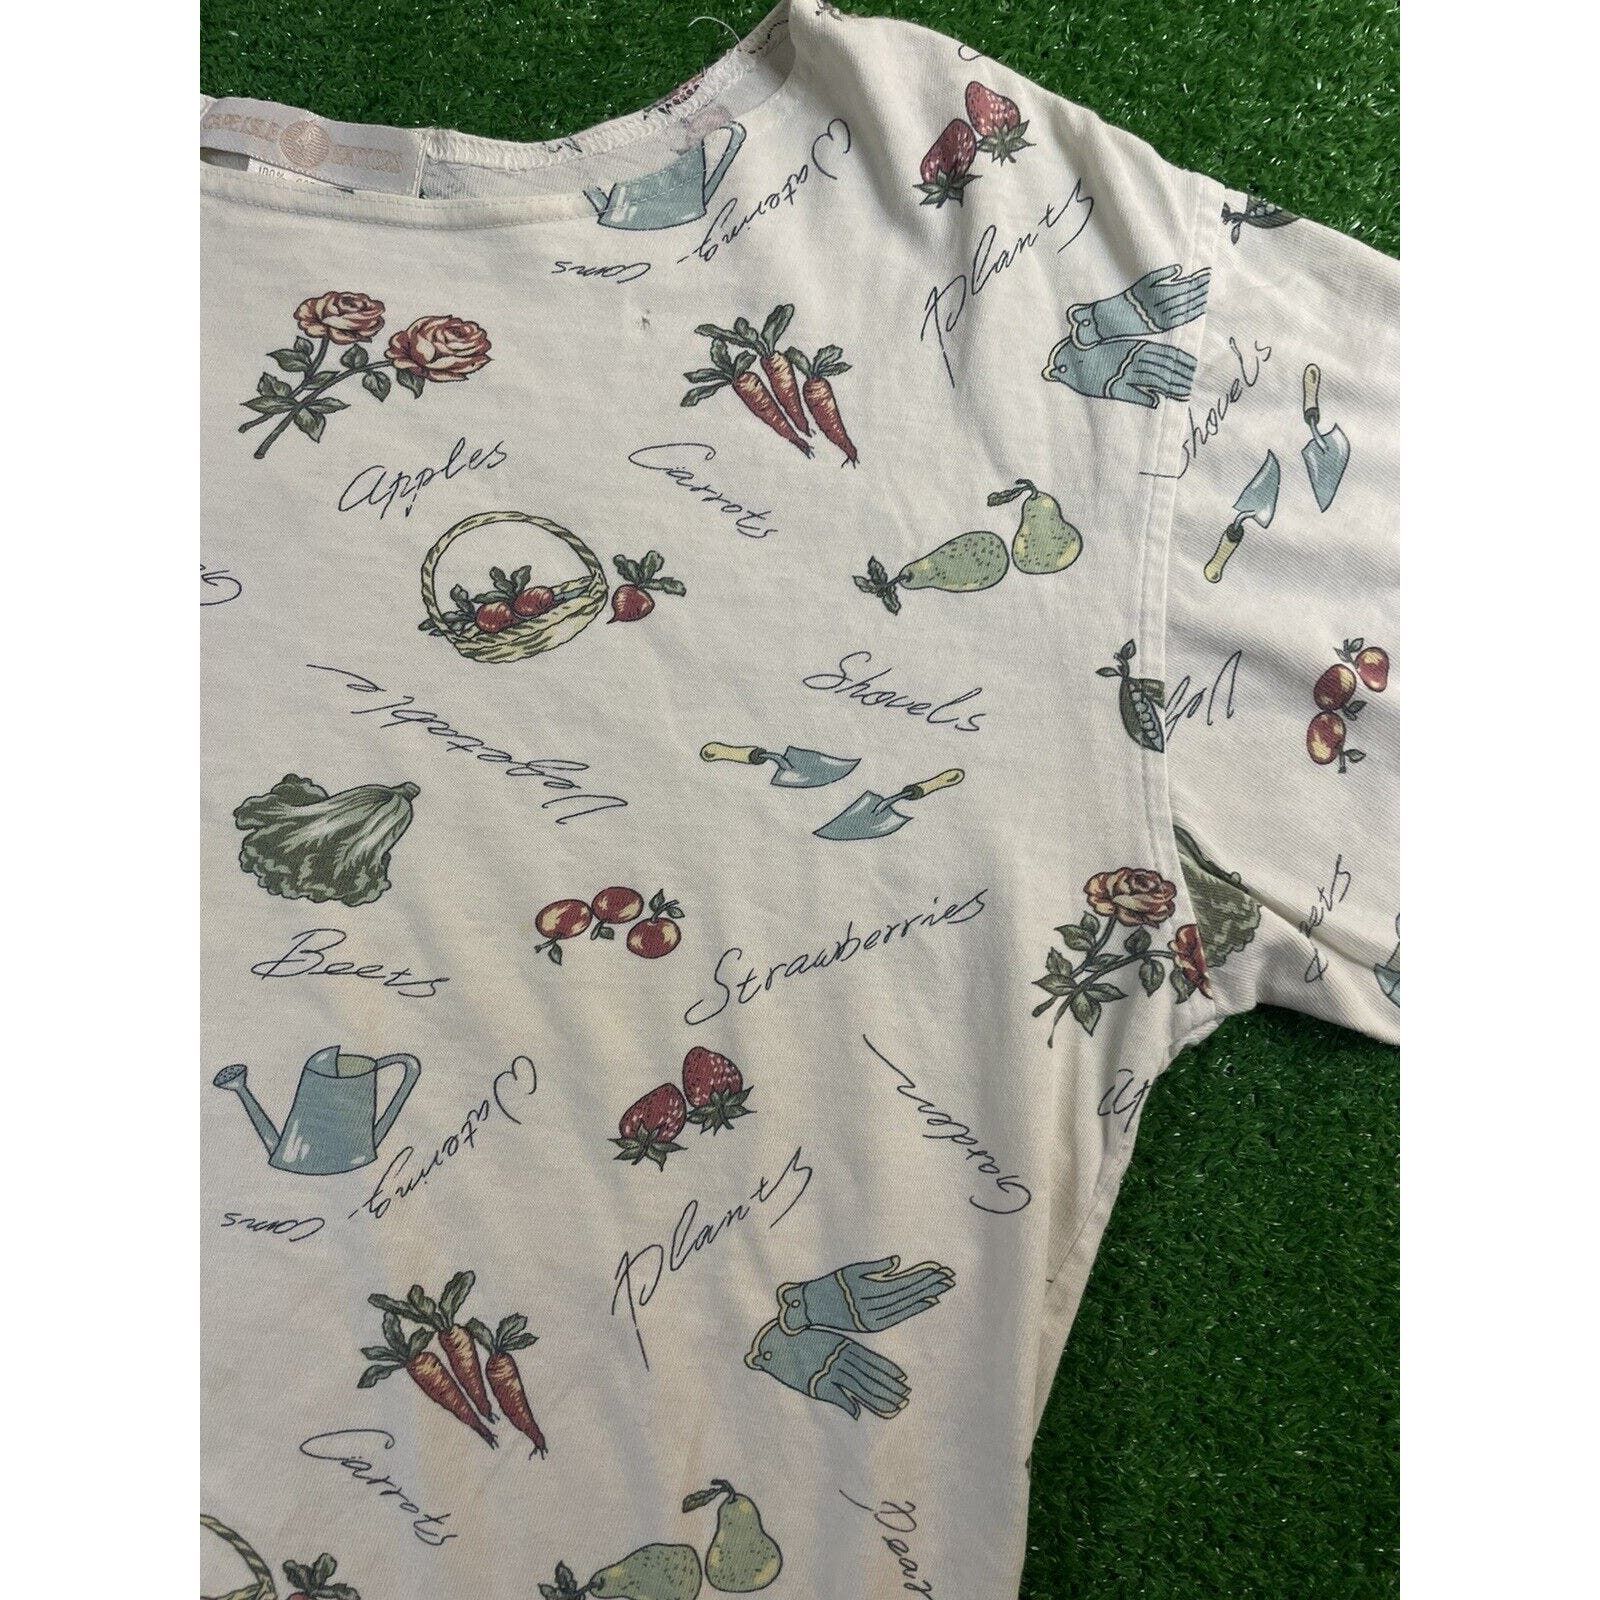 Vintage Vintage 90s Gardening All Over Small Strawberry Shirt USA Size S / US 4 / IT 40 - 2 Preview